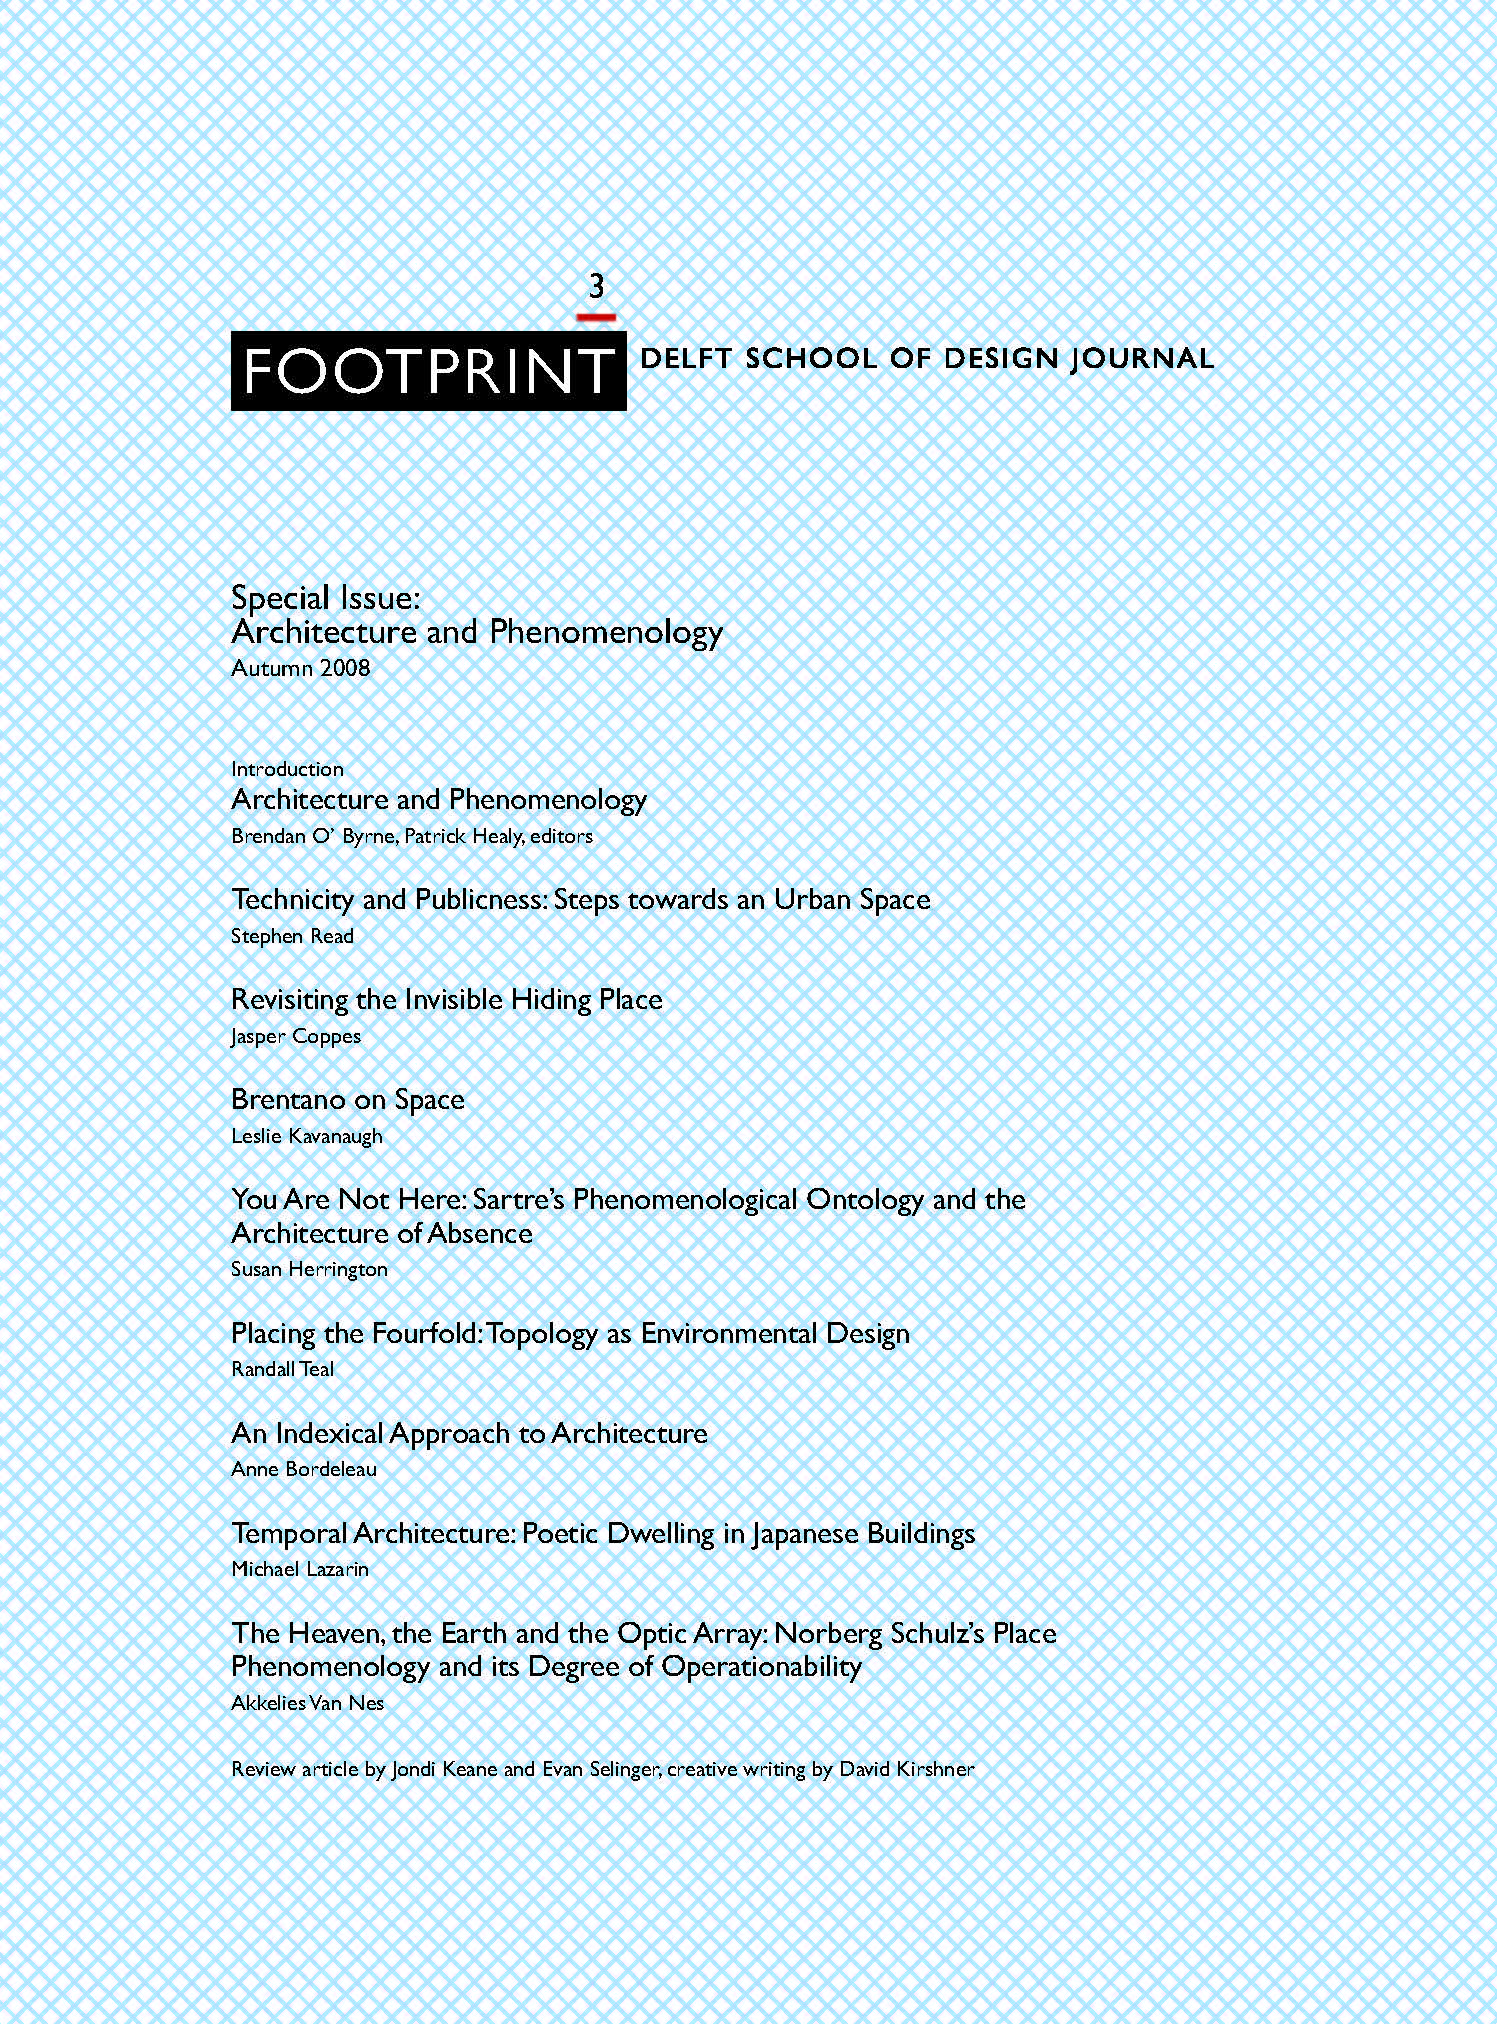 					View Issue # 3 | Special issue | Architecture and Phenomenology
				